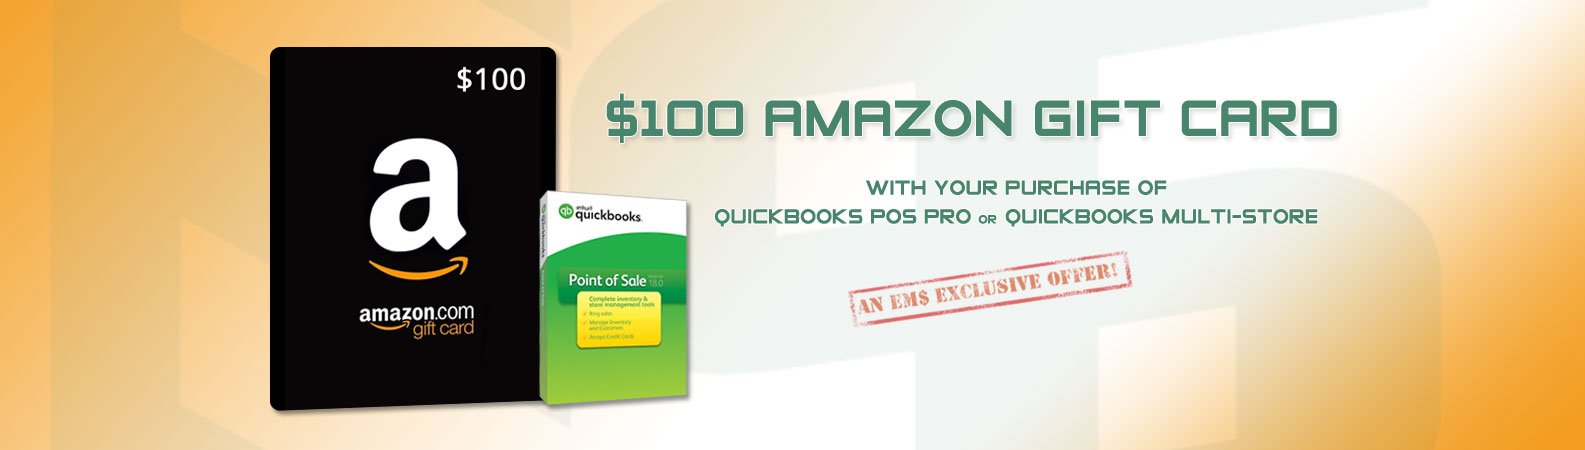 $100 Amazon Gift Card Offer